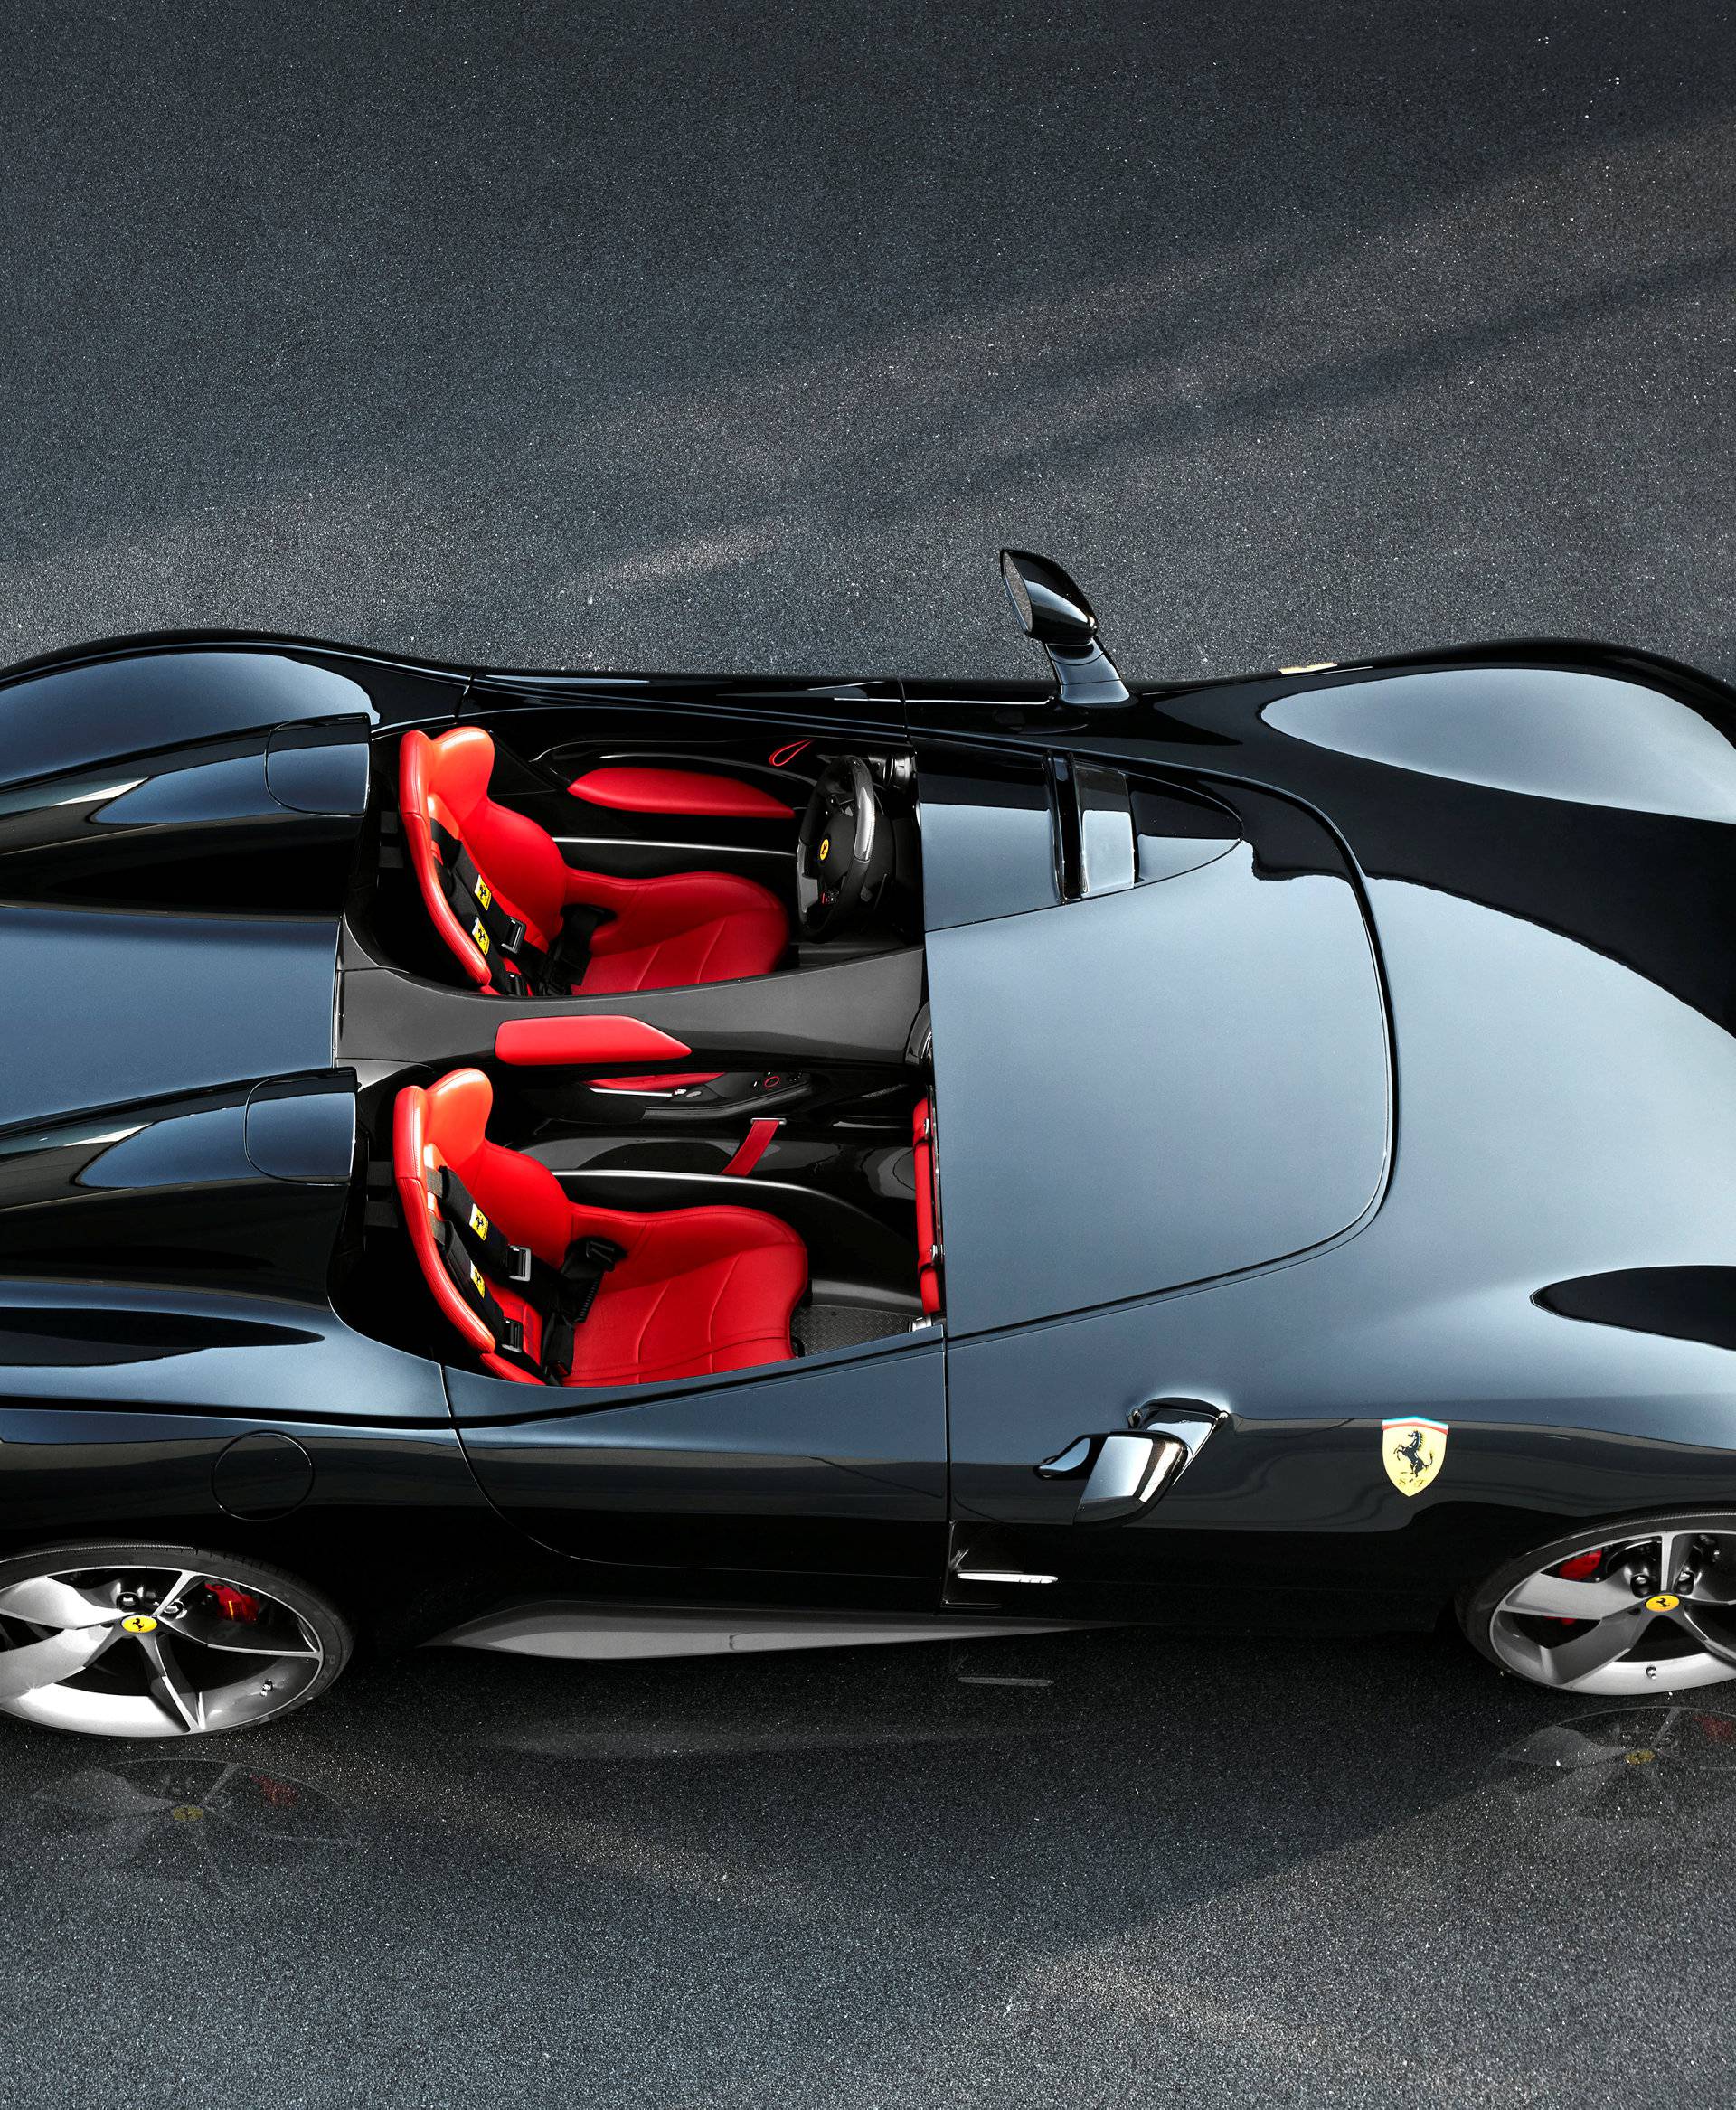 Ferrari's new Monza SP2 is seen in this picture released by Ferrari press office during a meeting in Maranello